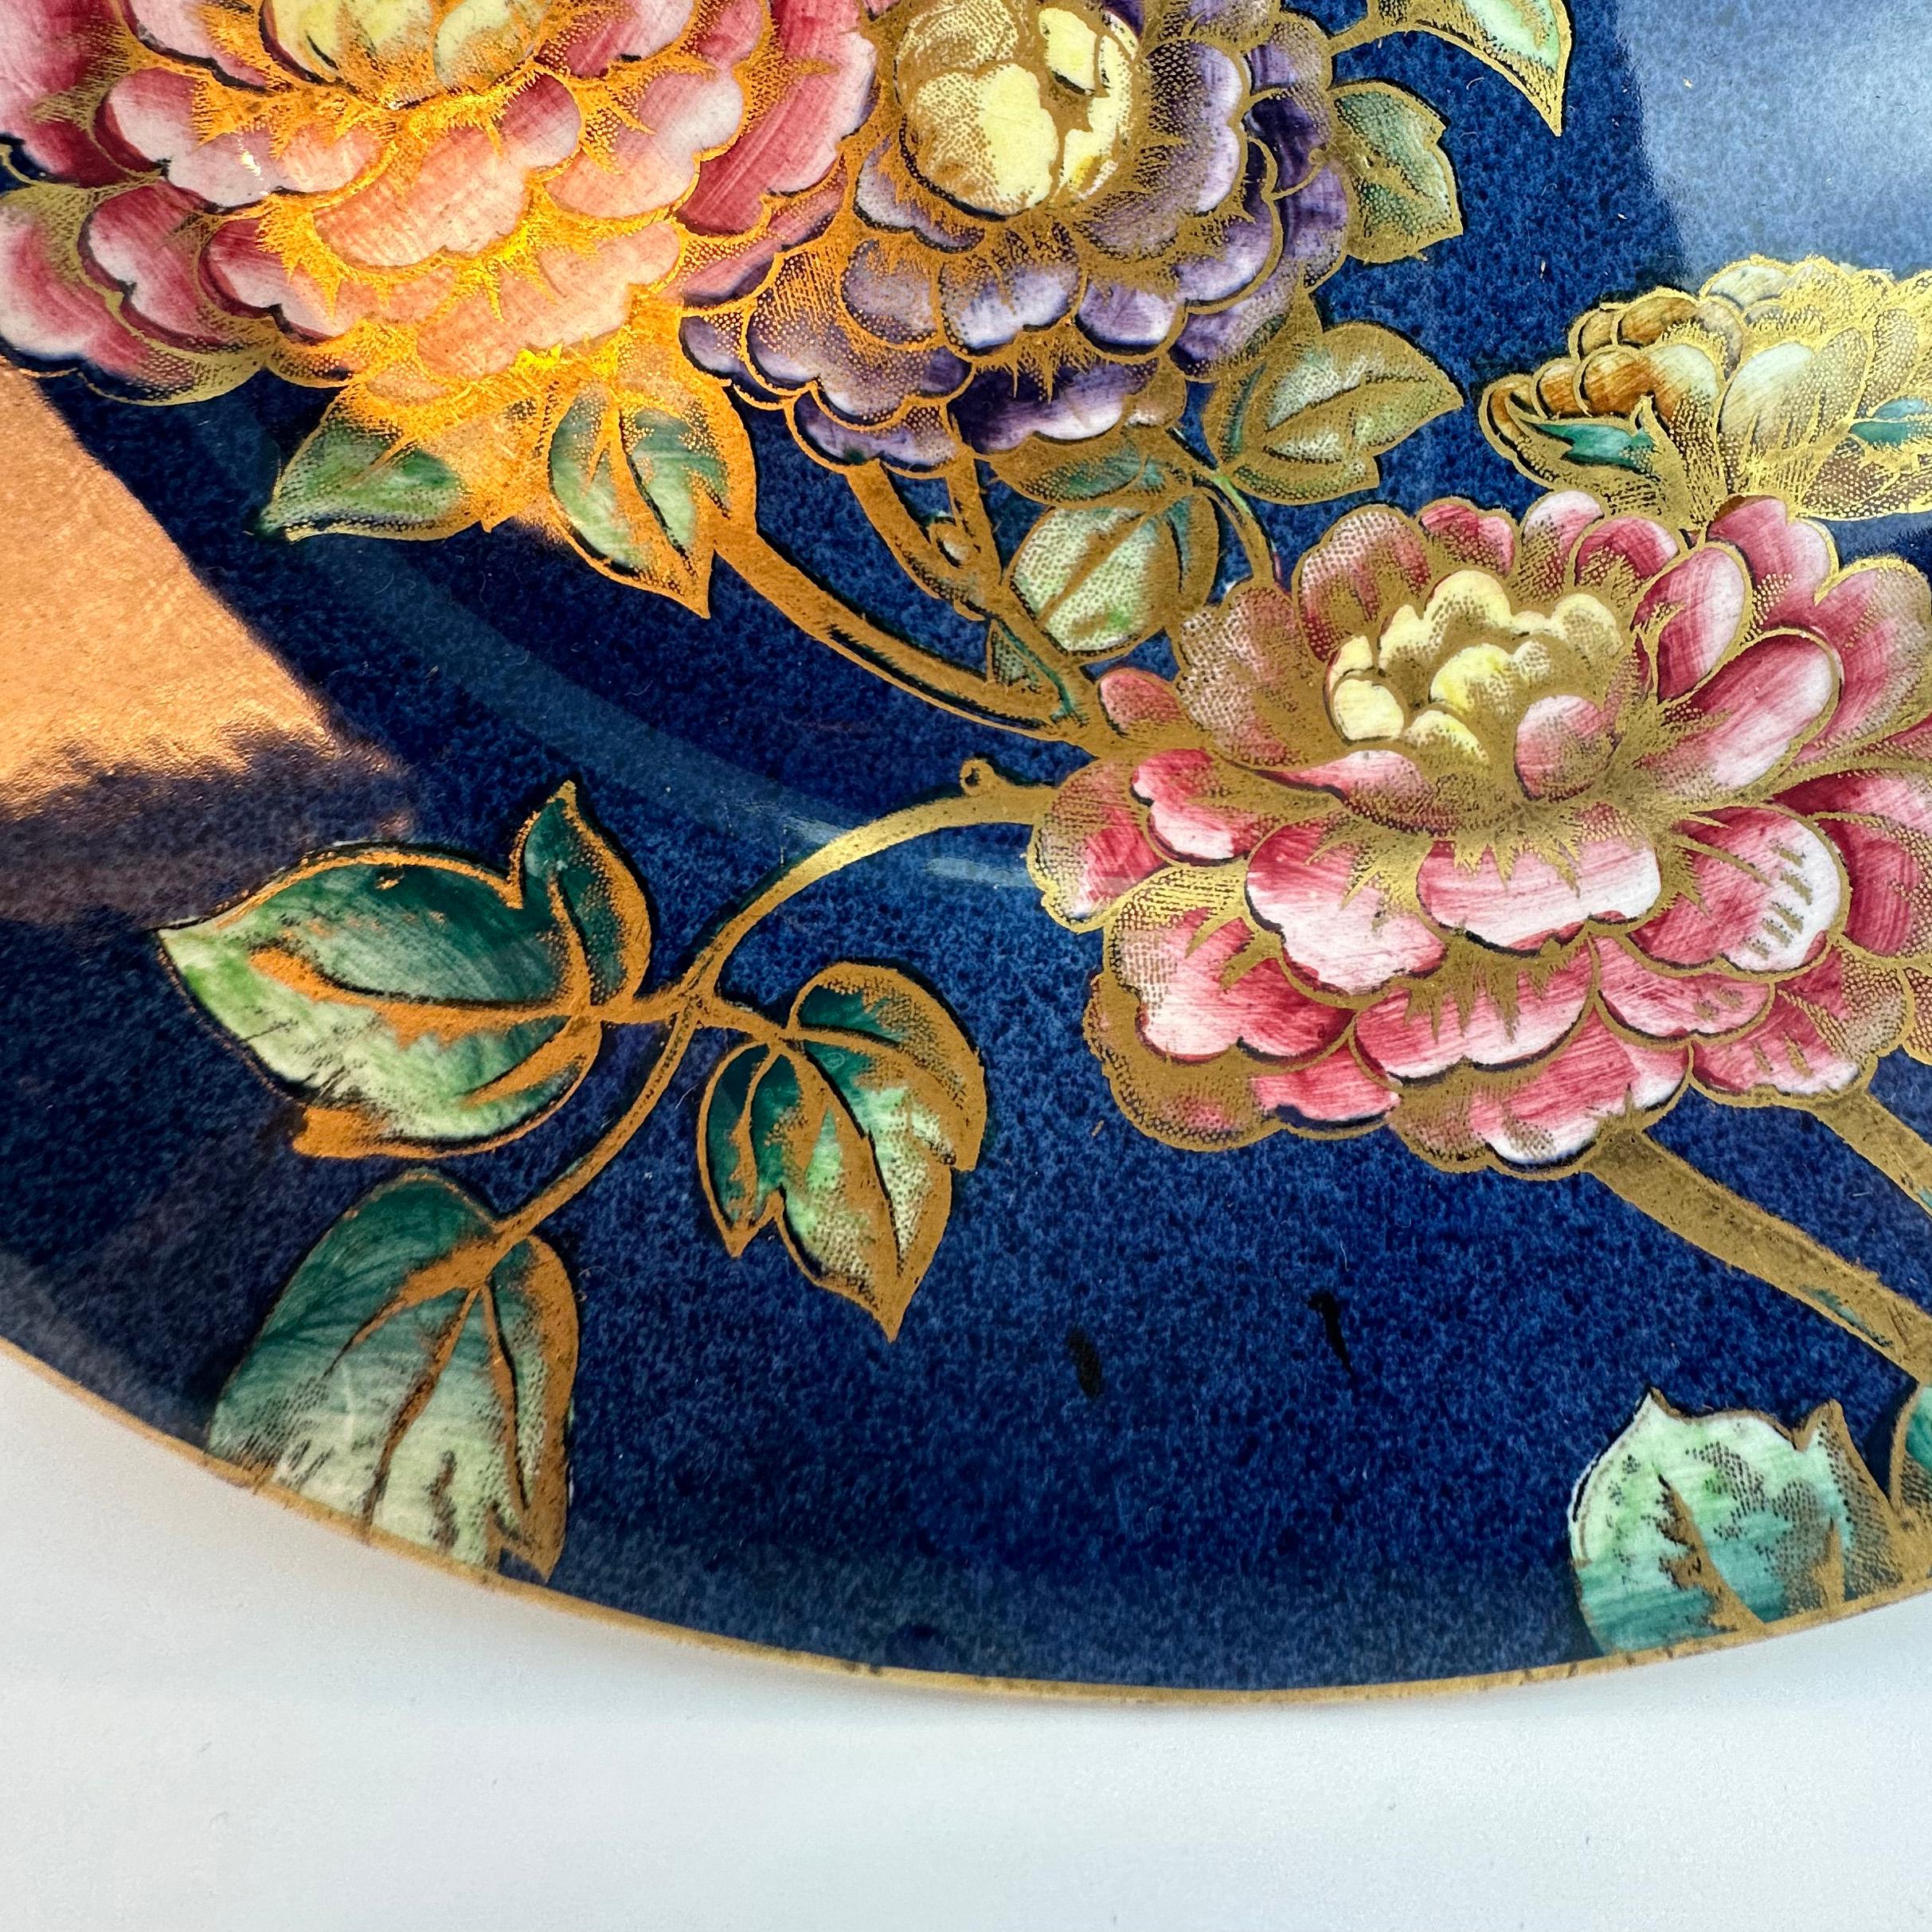 An exquisite porcelain wall plaque, crafted by the renowned Newcastle pottery company, Maling.

The large wall plaque boasts a rich, deep mottled azure blue base, providing a striking backdrop for a delicate floral illustration of climbing roses.